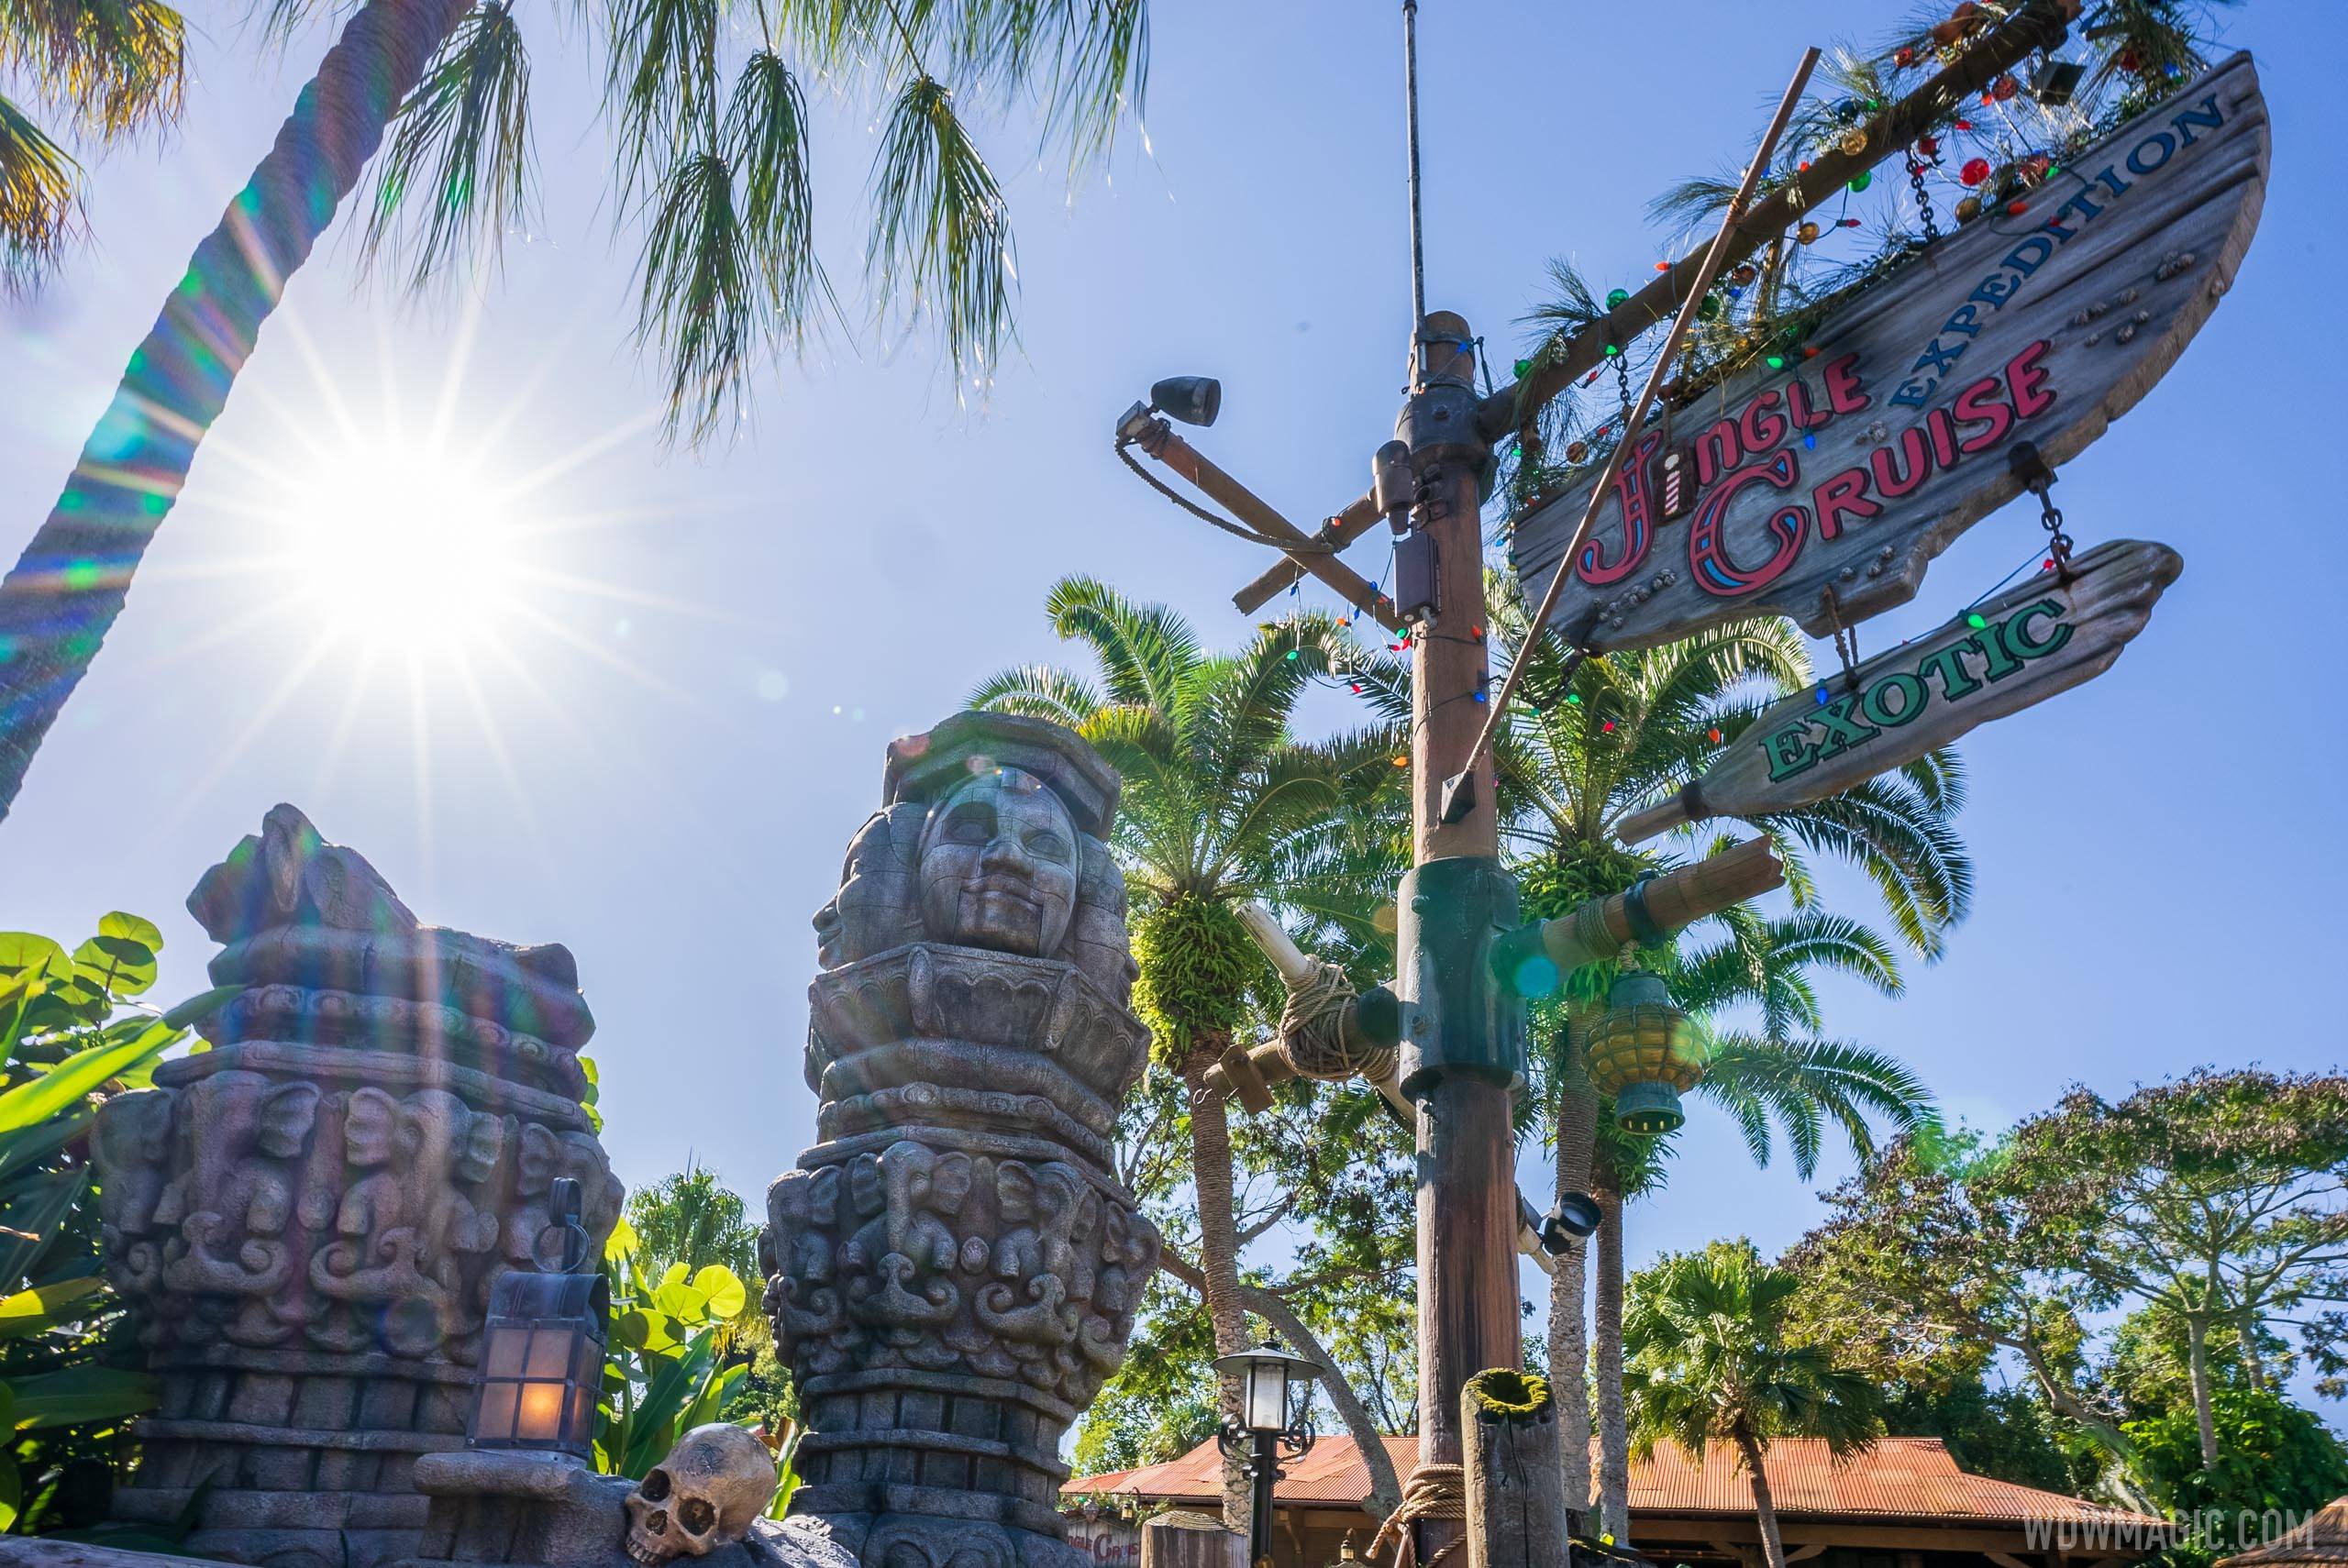 Jingle Cruise overview